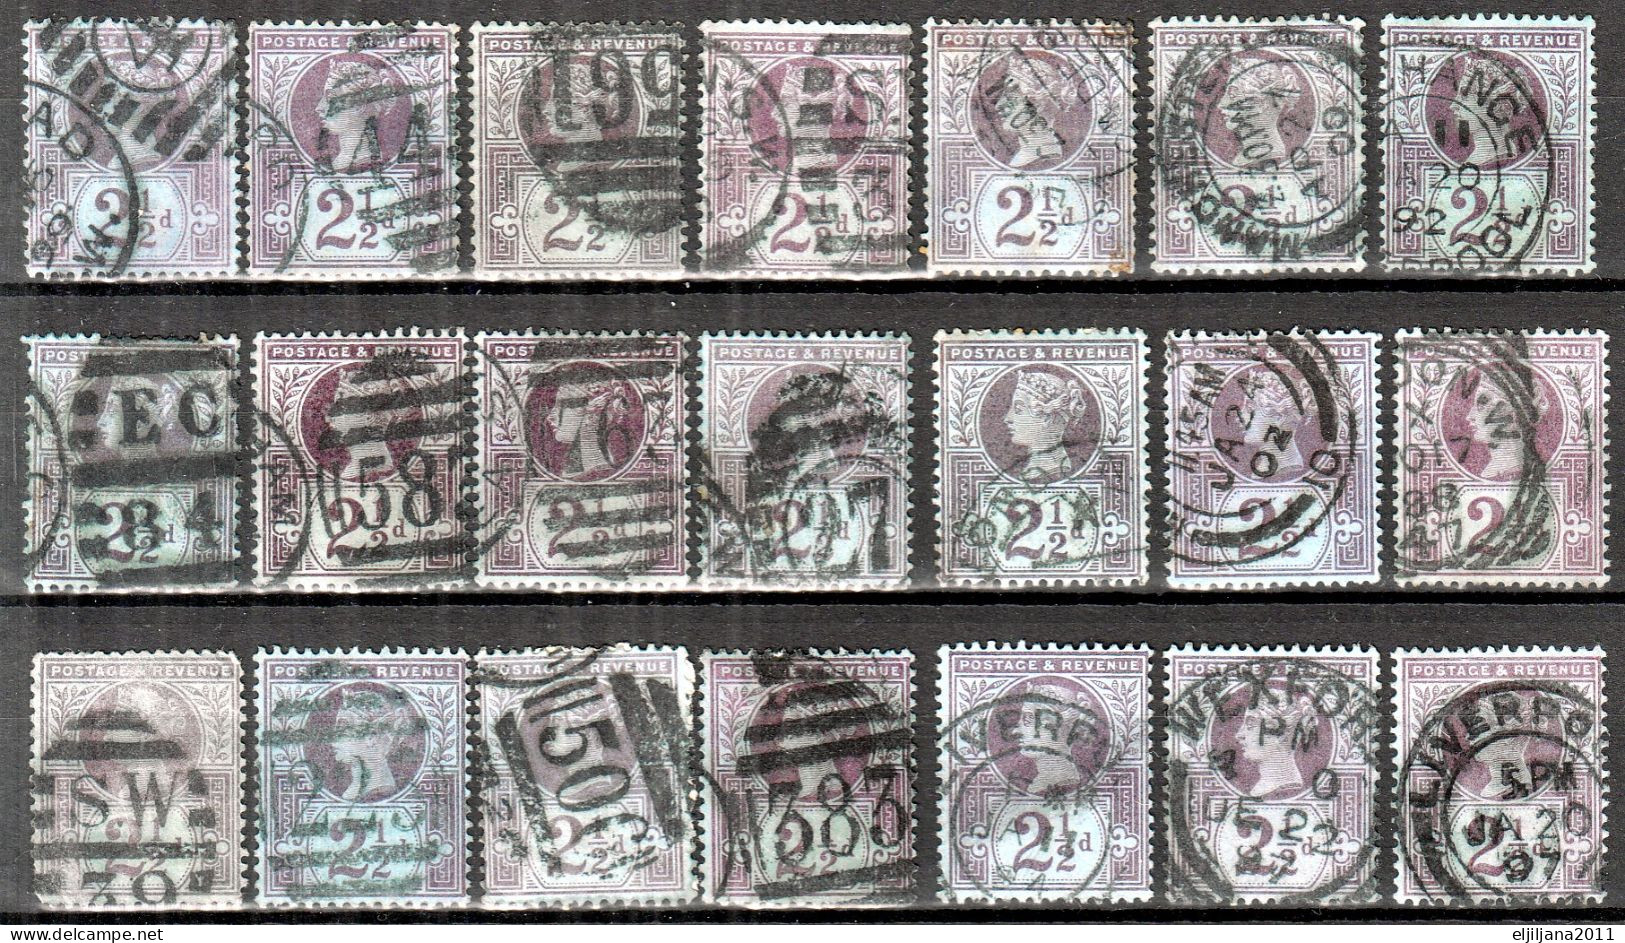 Great Britain GB / UK 1887 ⁕ QV Jubilee Issue 50th 2½d Mi.89 / SG 201 ⁕ 21v Used / Shades / Nice Postmark - Used Stamps